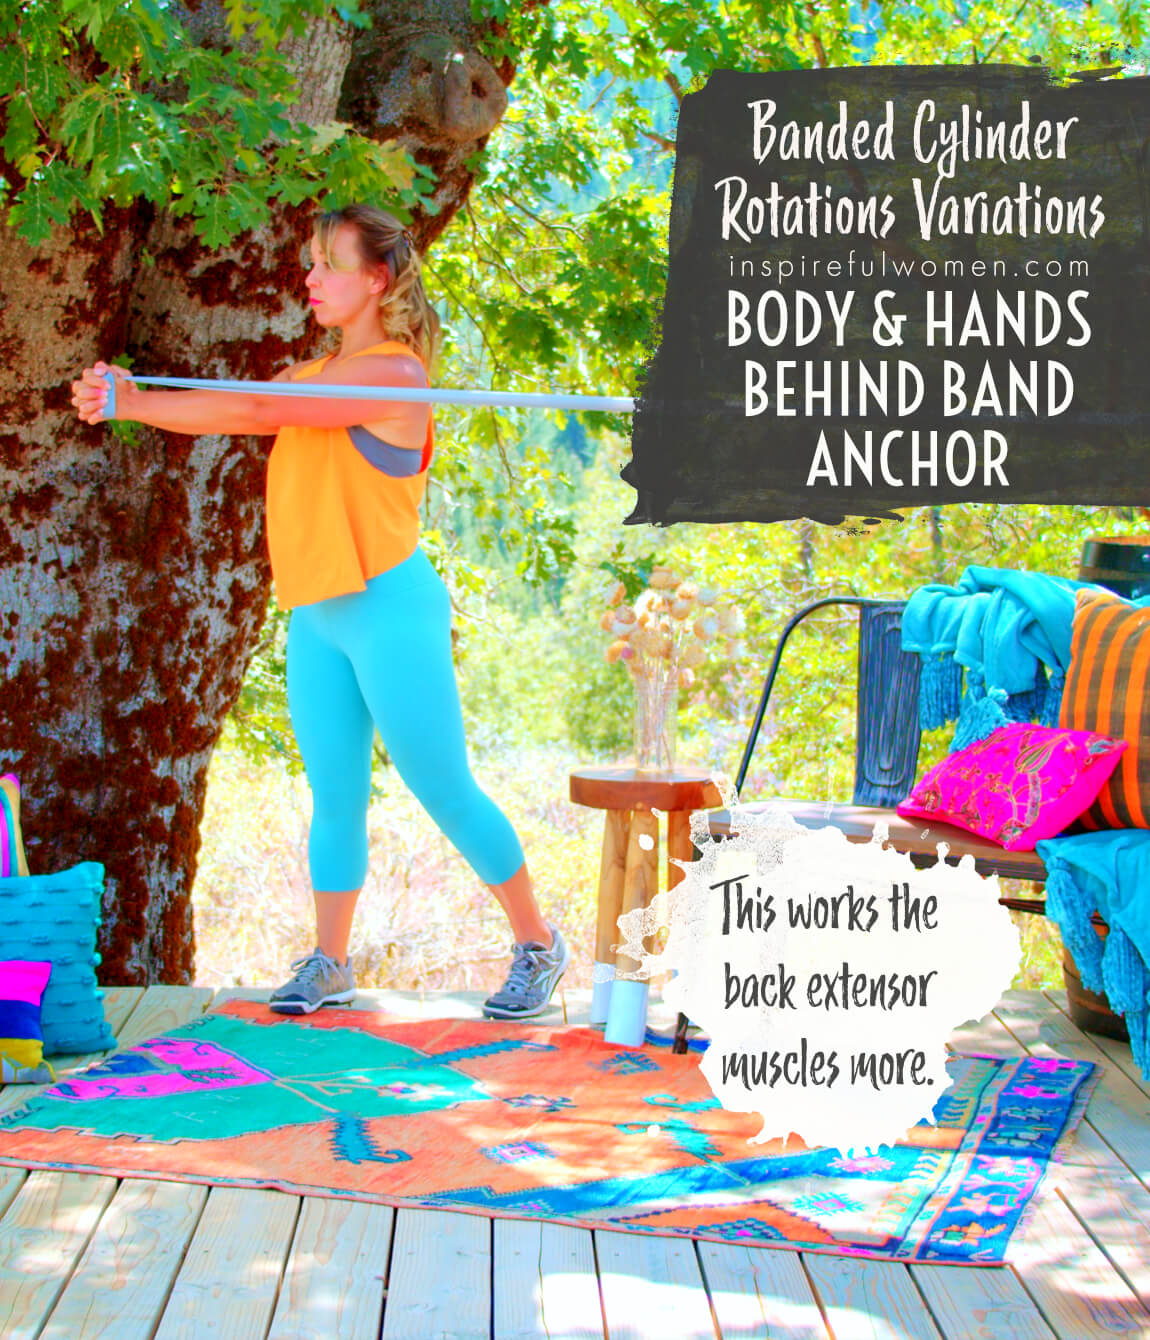 body-hands-behind-band-anchor-banded-cylinder-rotations-core-exercise-variation